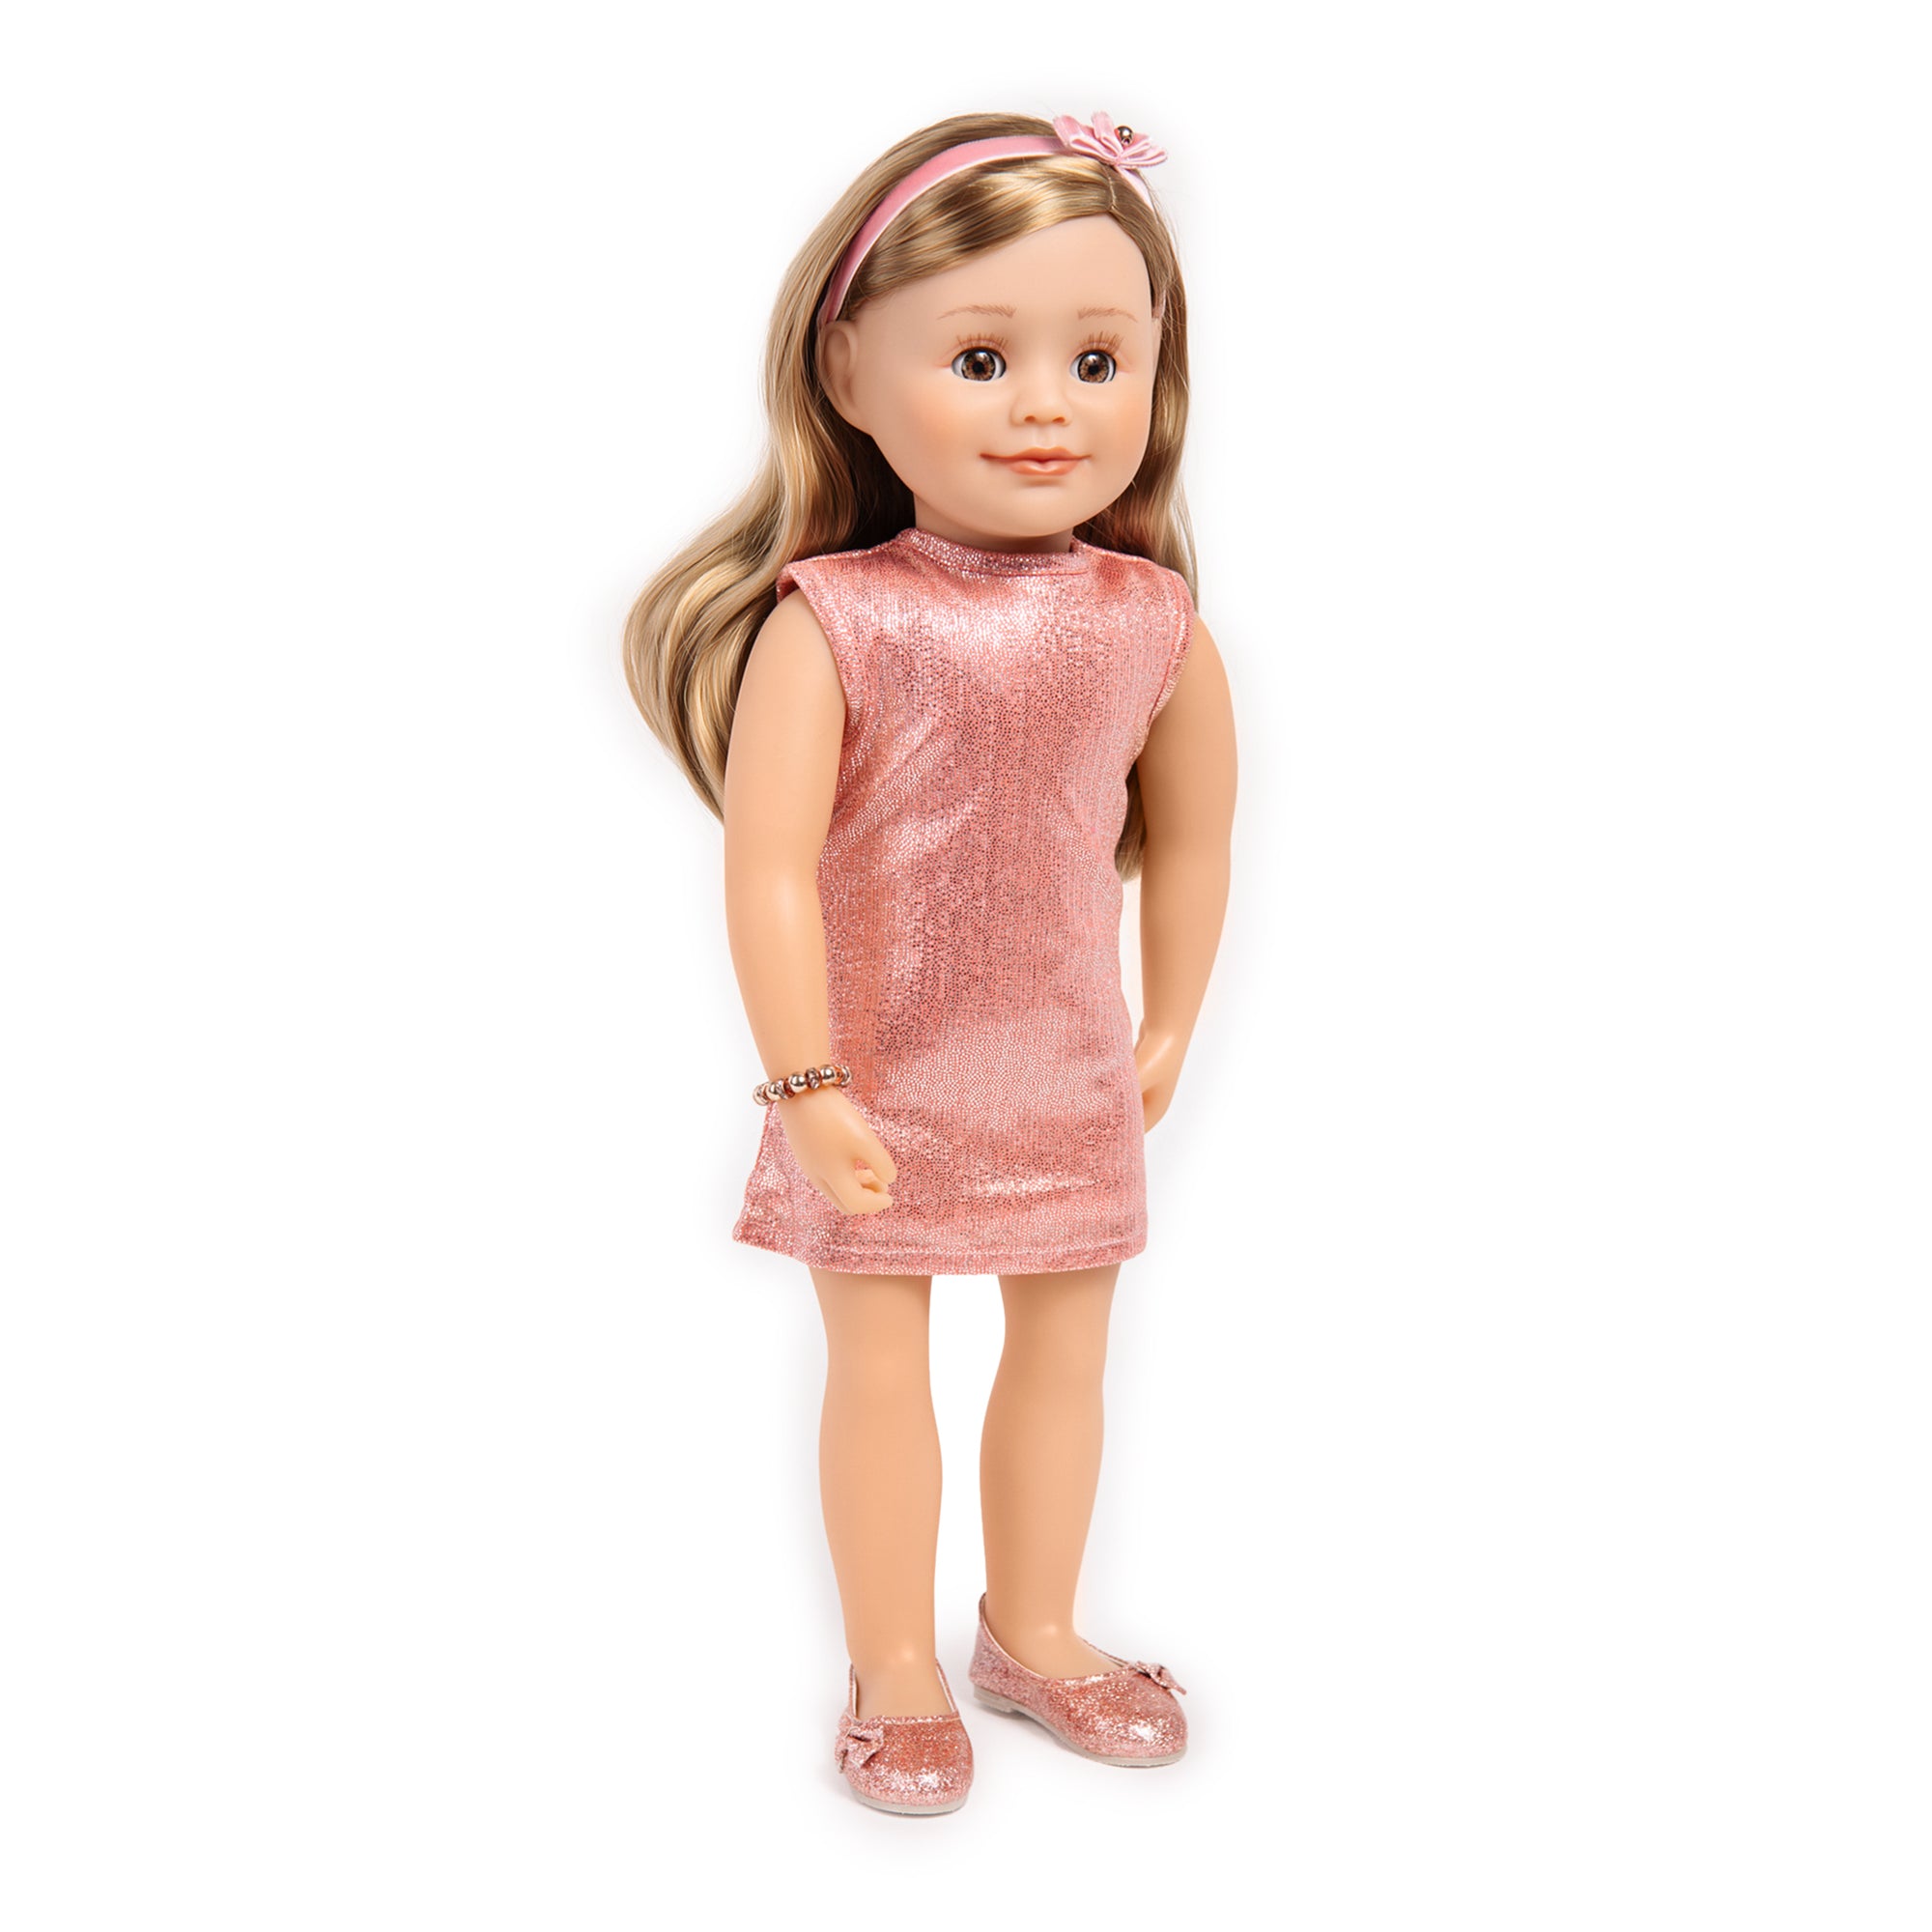 Sparkly summer dress for 18-inch dolls with matching sparkly pink shoes